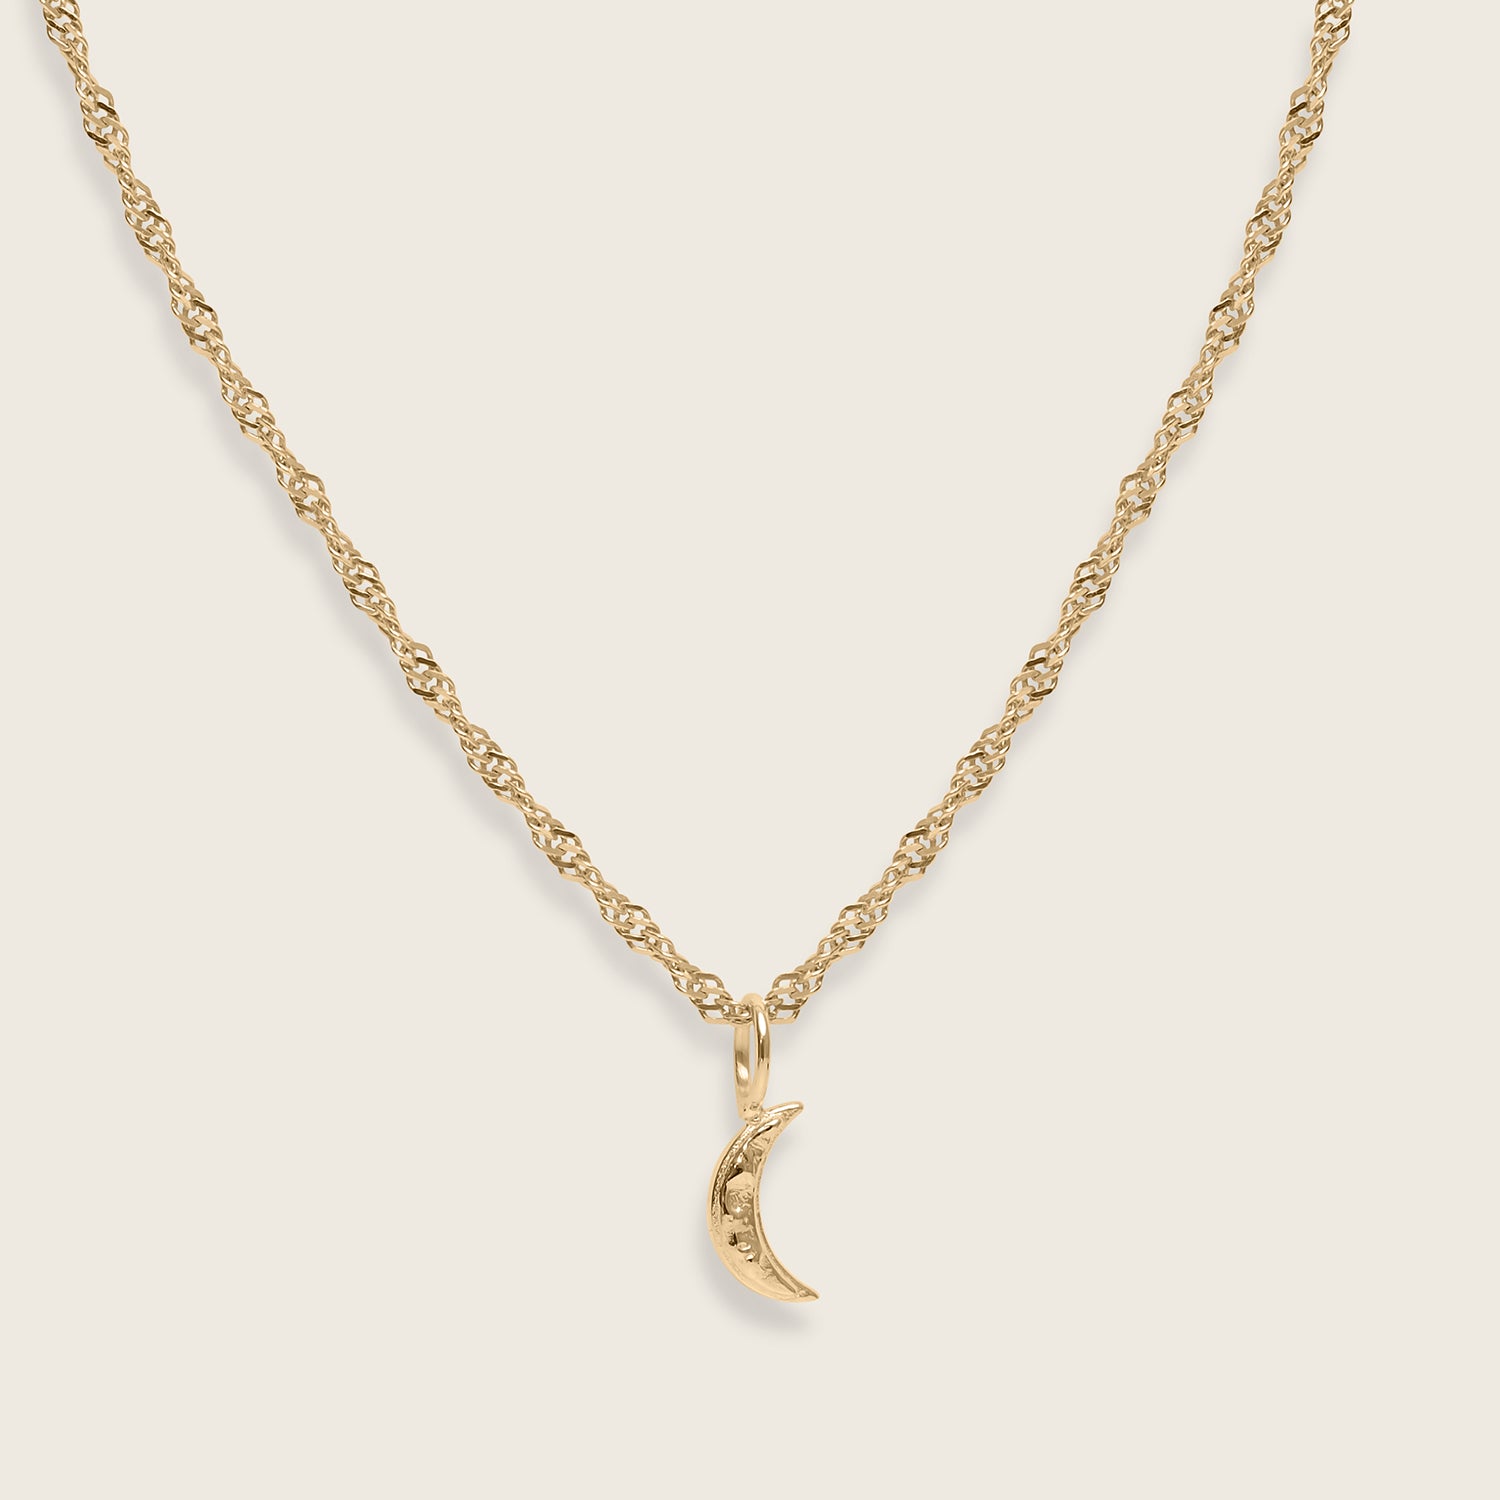 Lunar Eclipse Necklace with Singapore Chain 14k Solid Gold